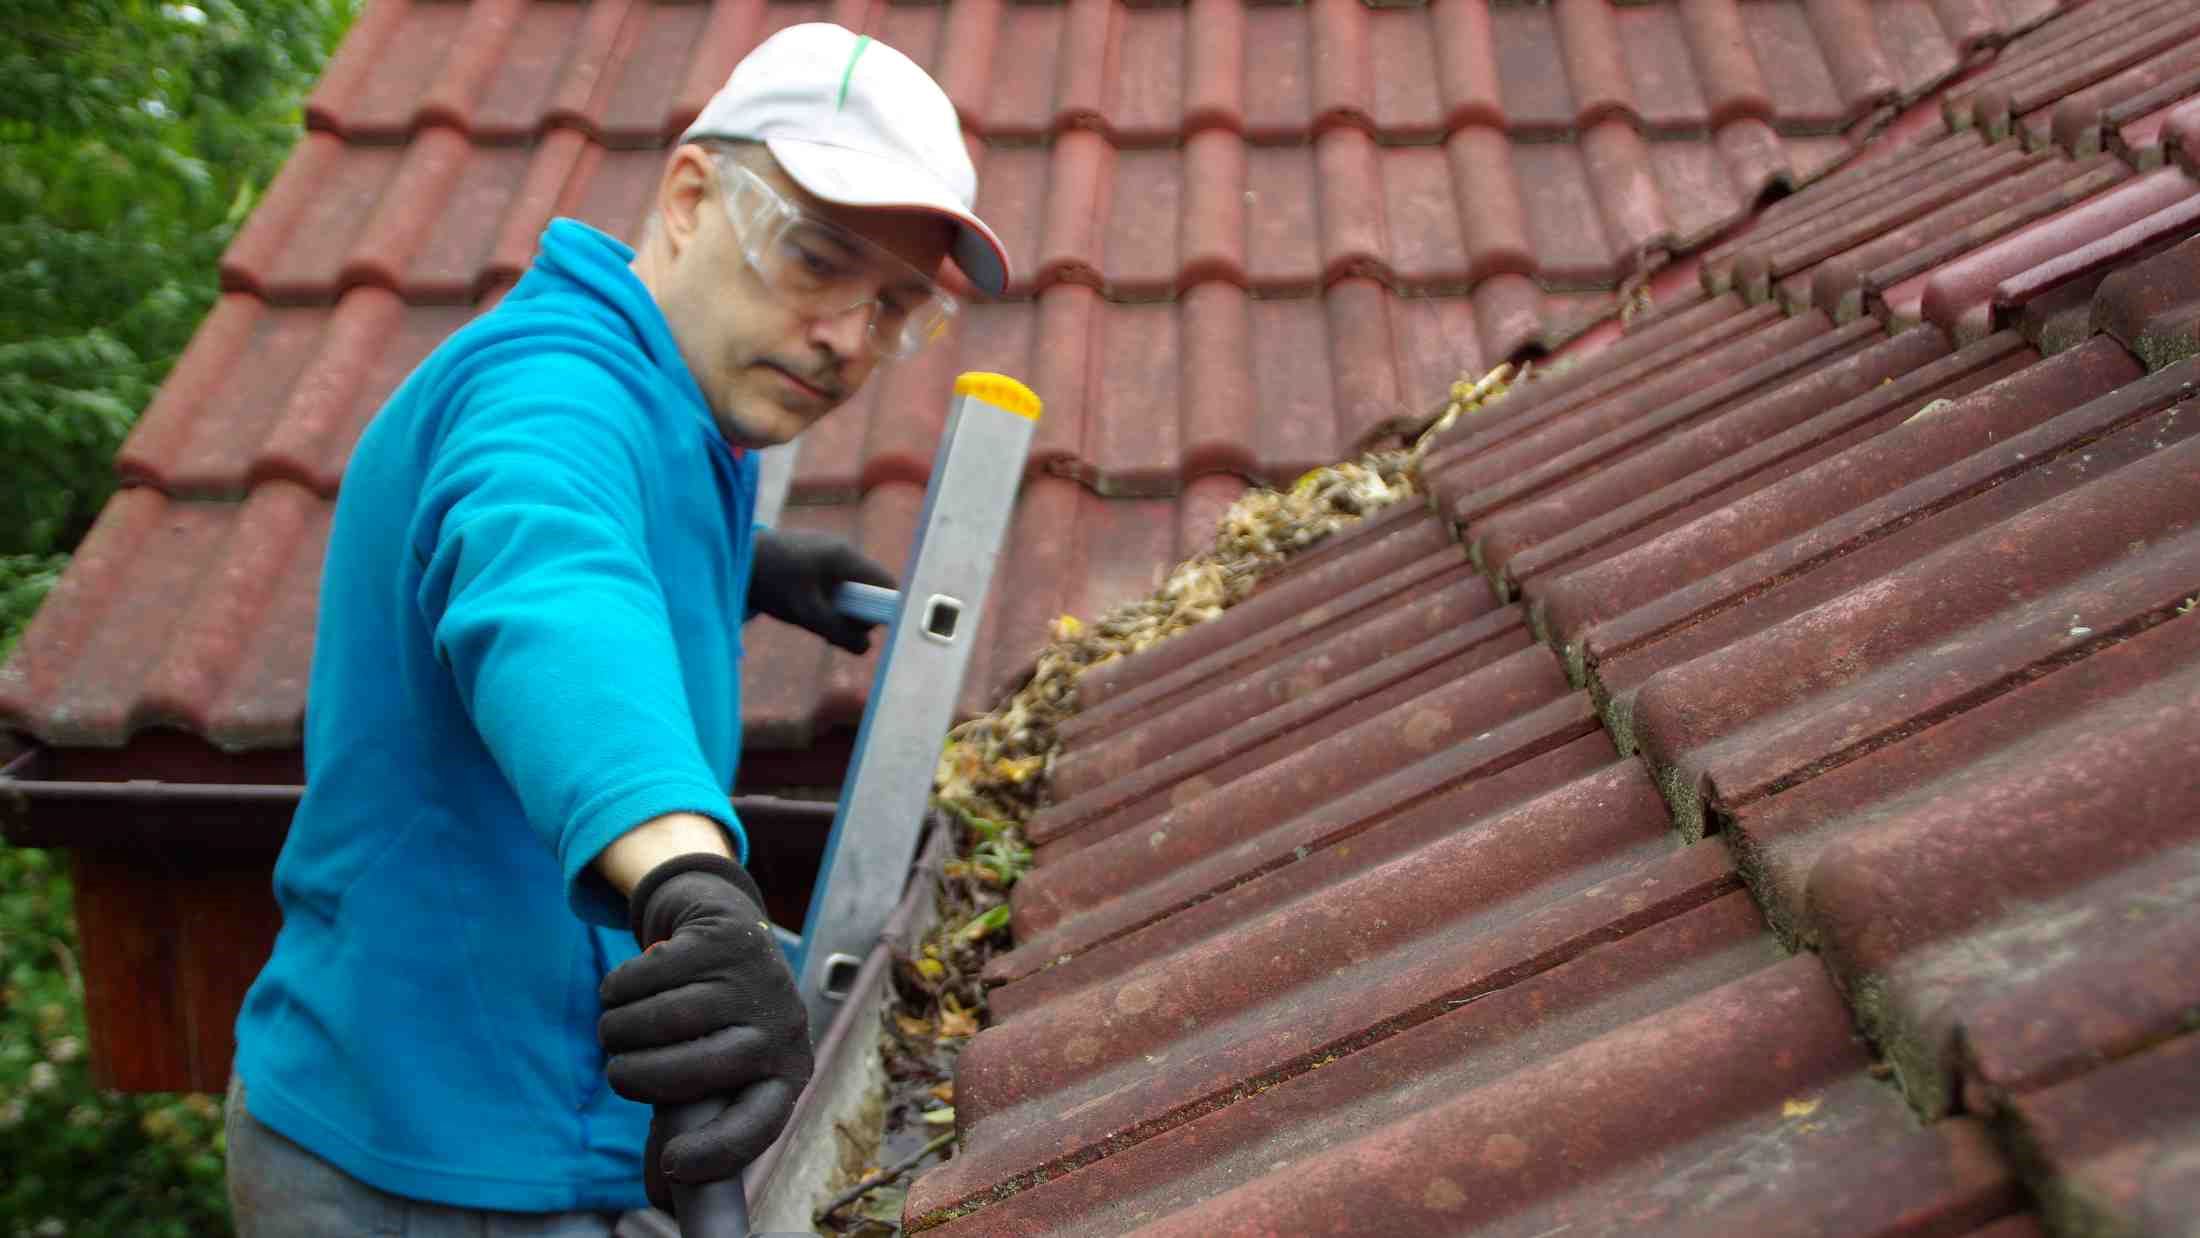 Man on ladder cleans gutter on a house roof